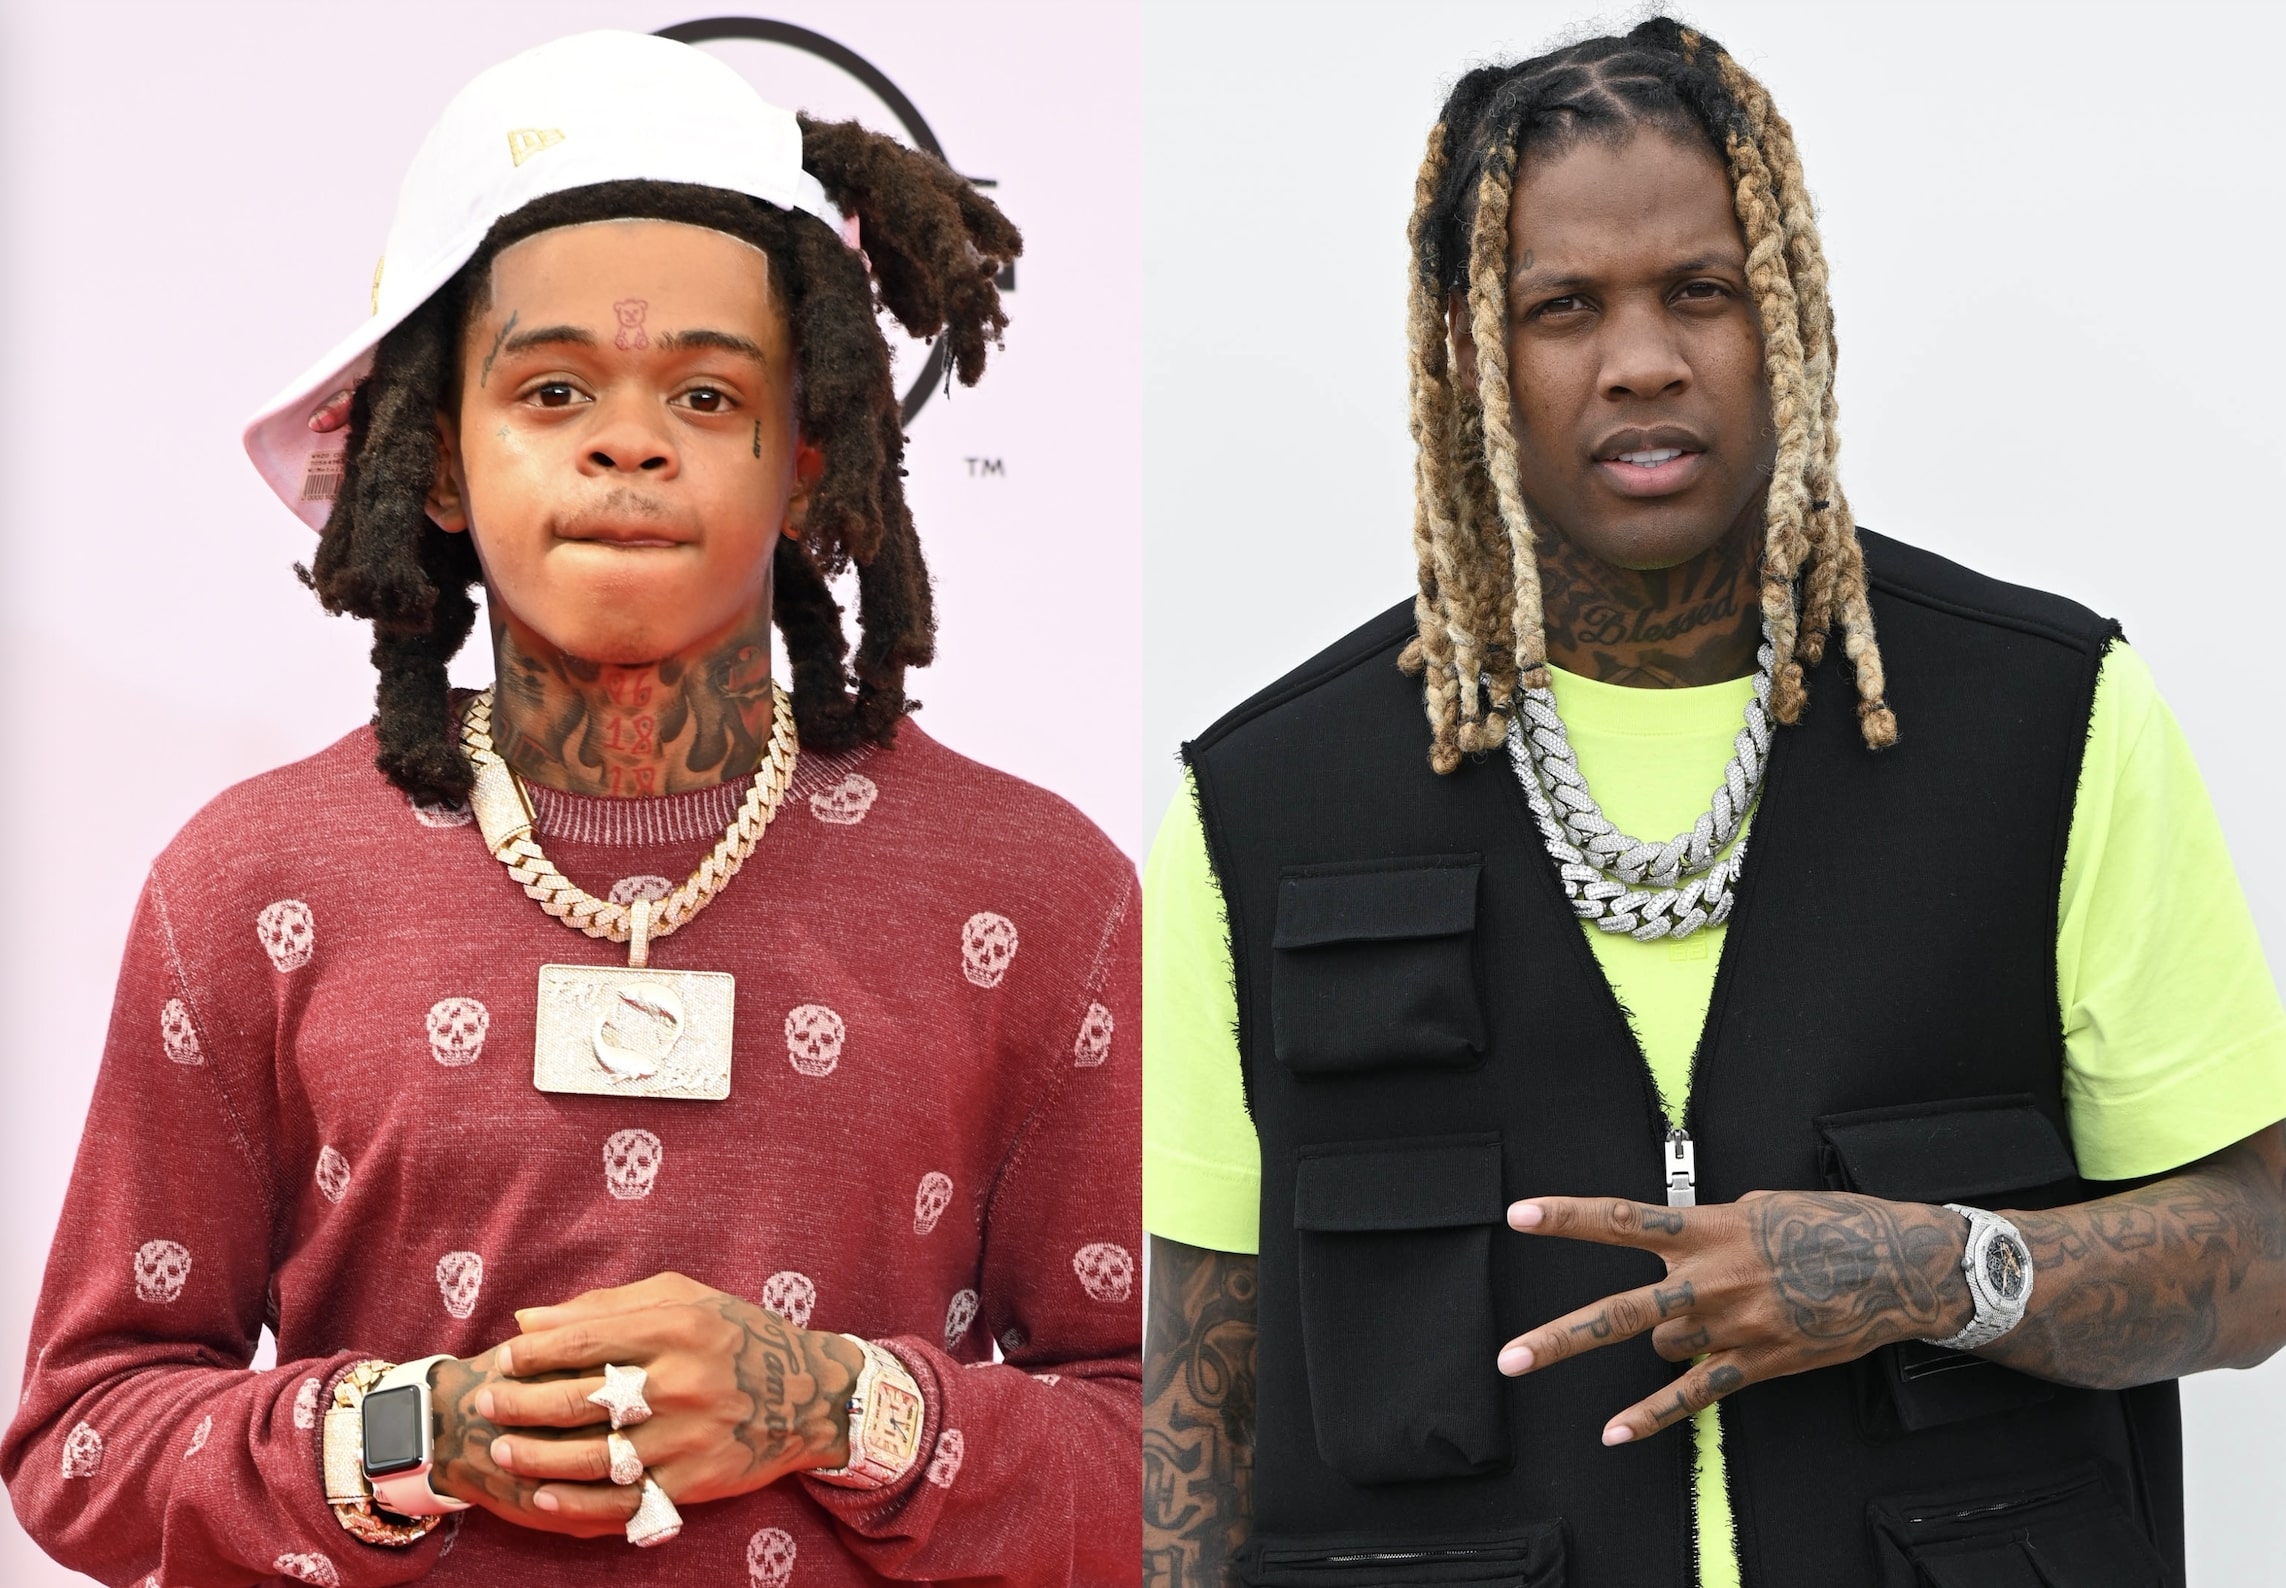 SpotemGottem Snitching Allegations Caused Lil Durk To Return His $100K, Shawn Cotton Confirms